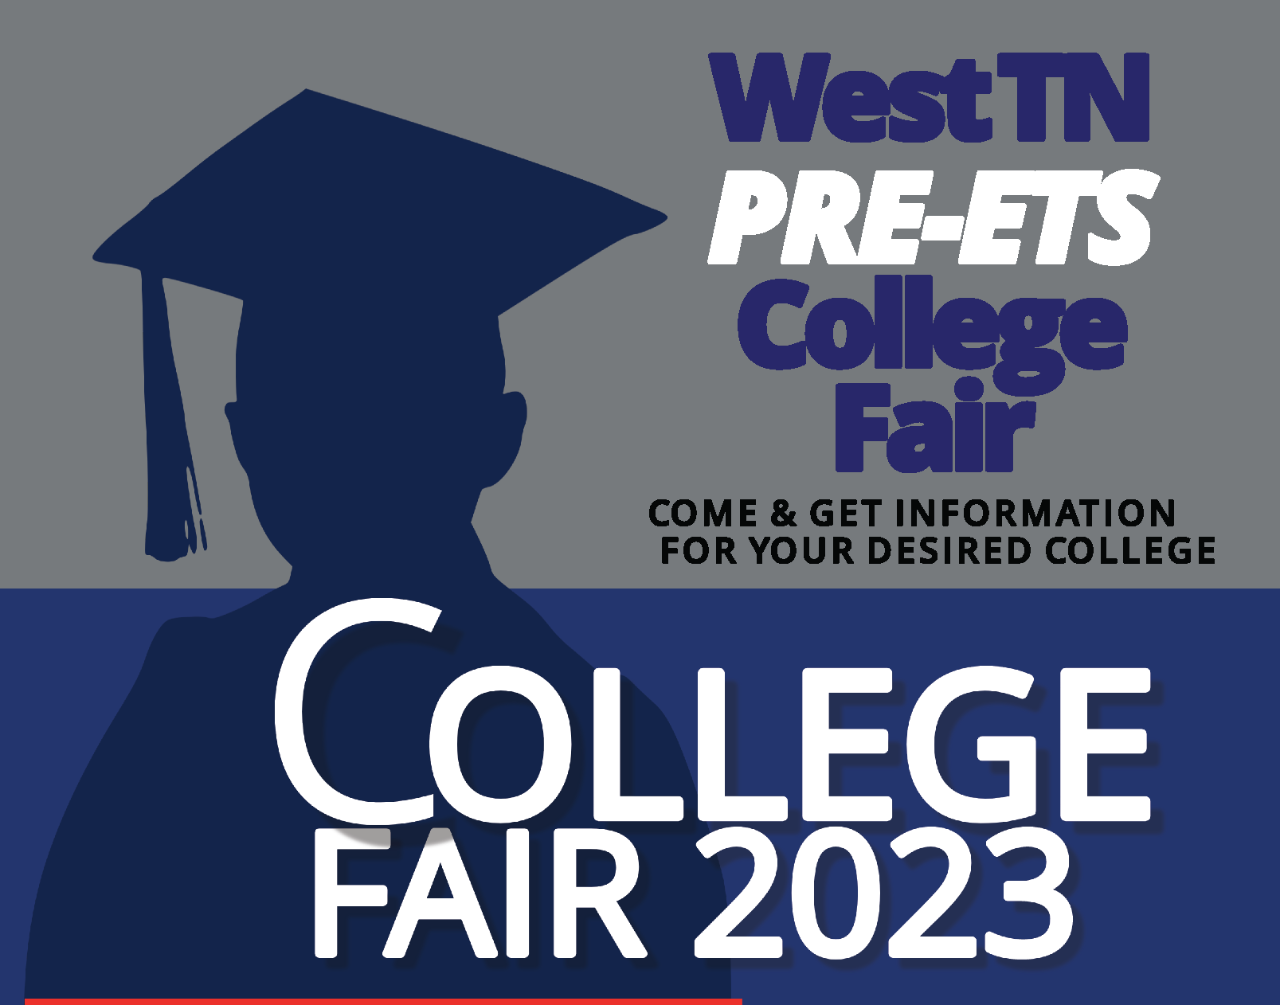 Silhouette of graduate in cap and gown with text “West TN Pre-ETS College Fair”